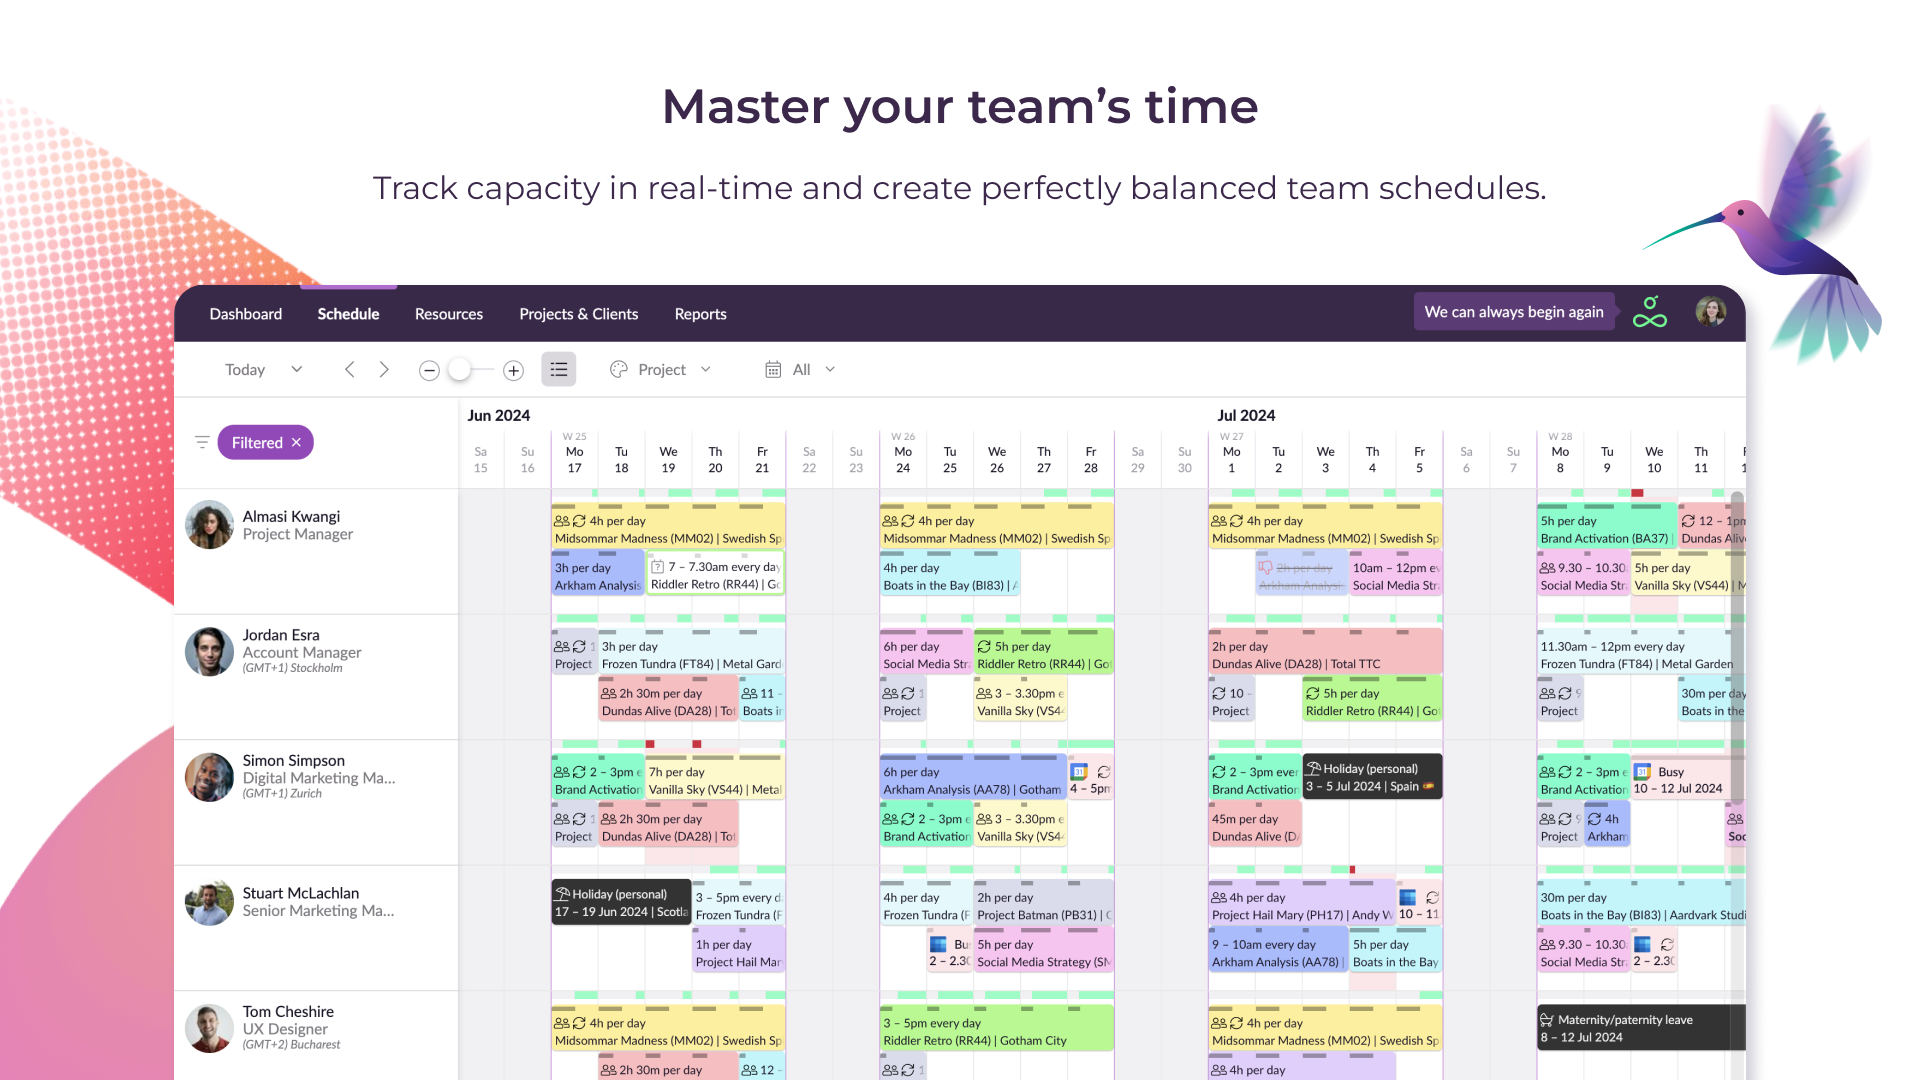 Master your team’s time